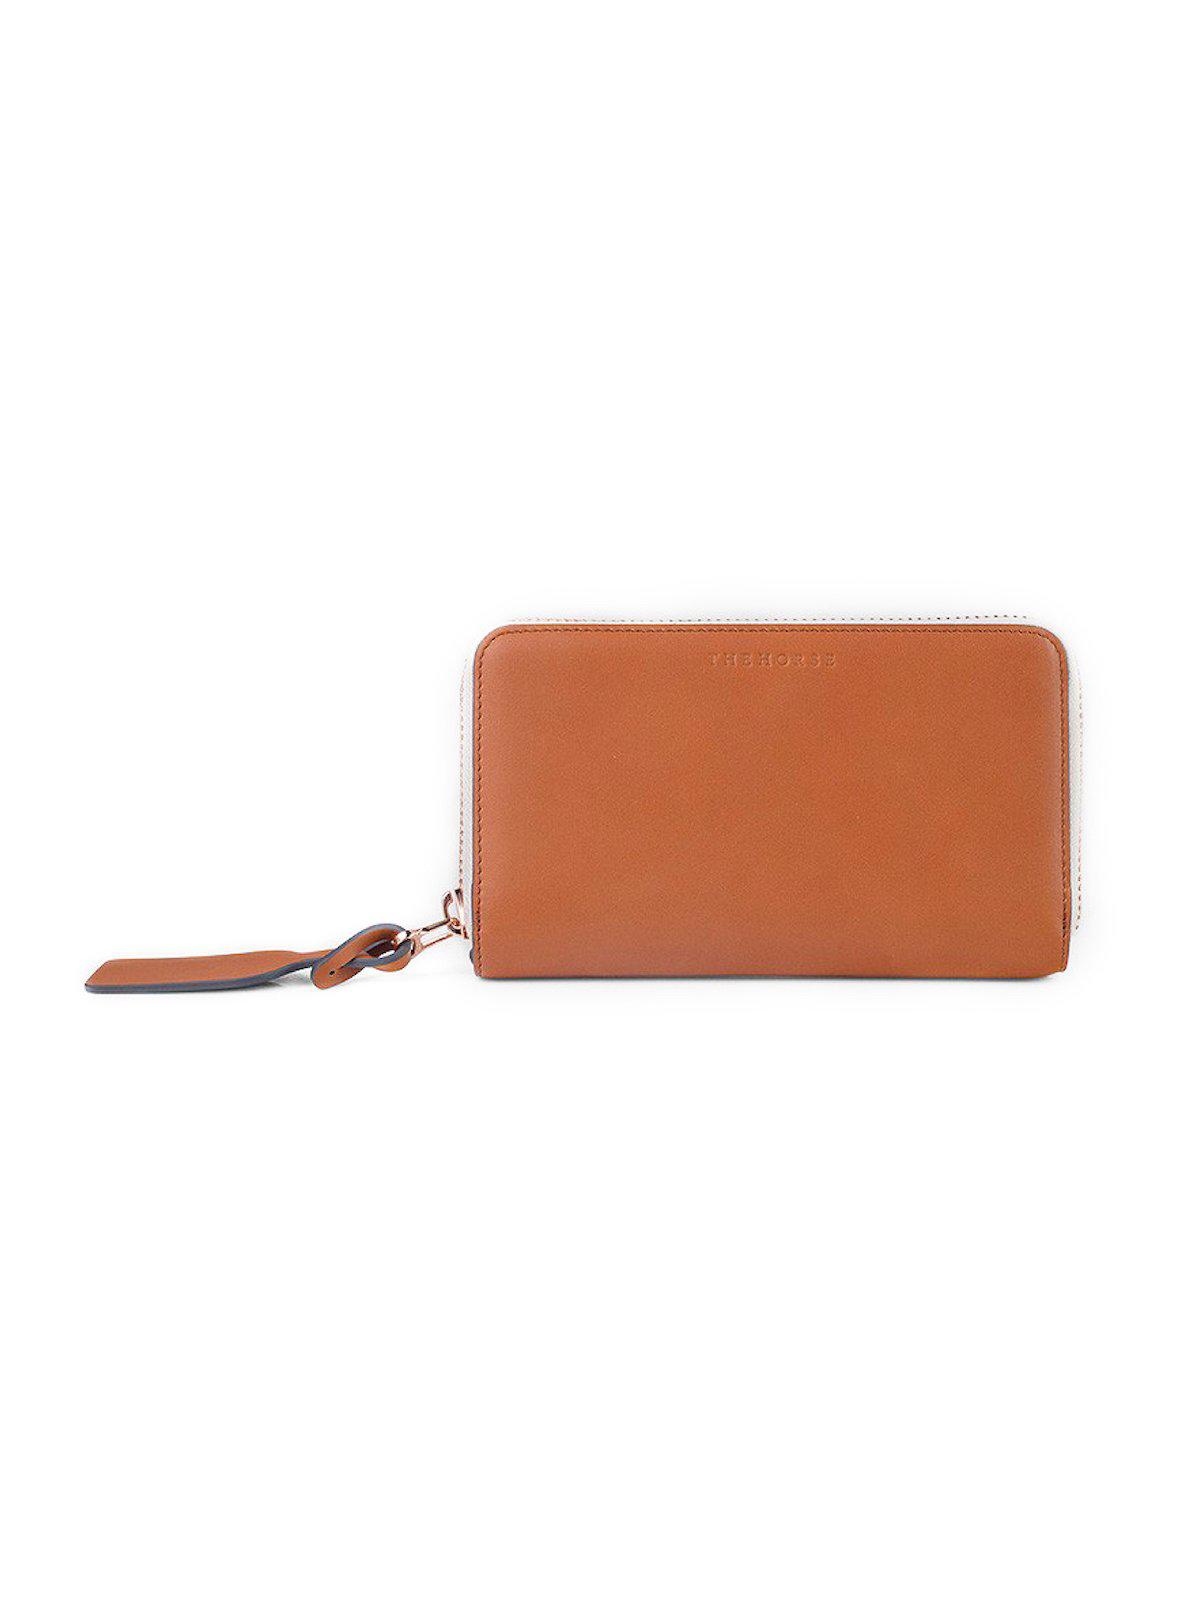 The Horse Block Wallet Tan - MORE by Morello Indonesia